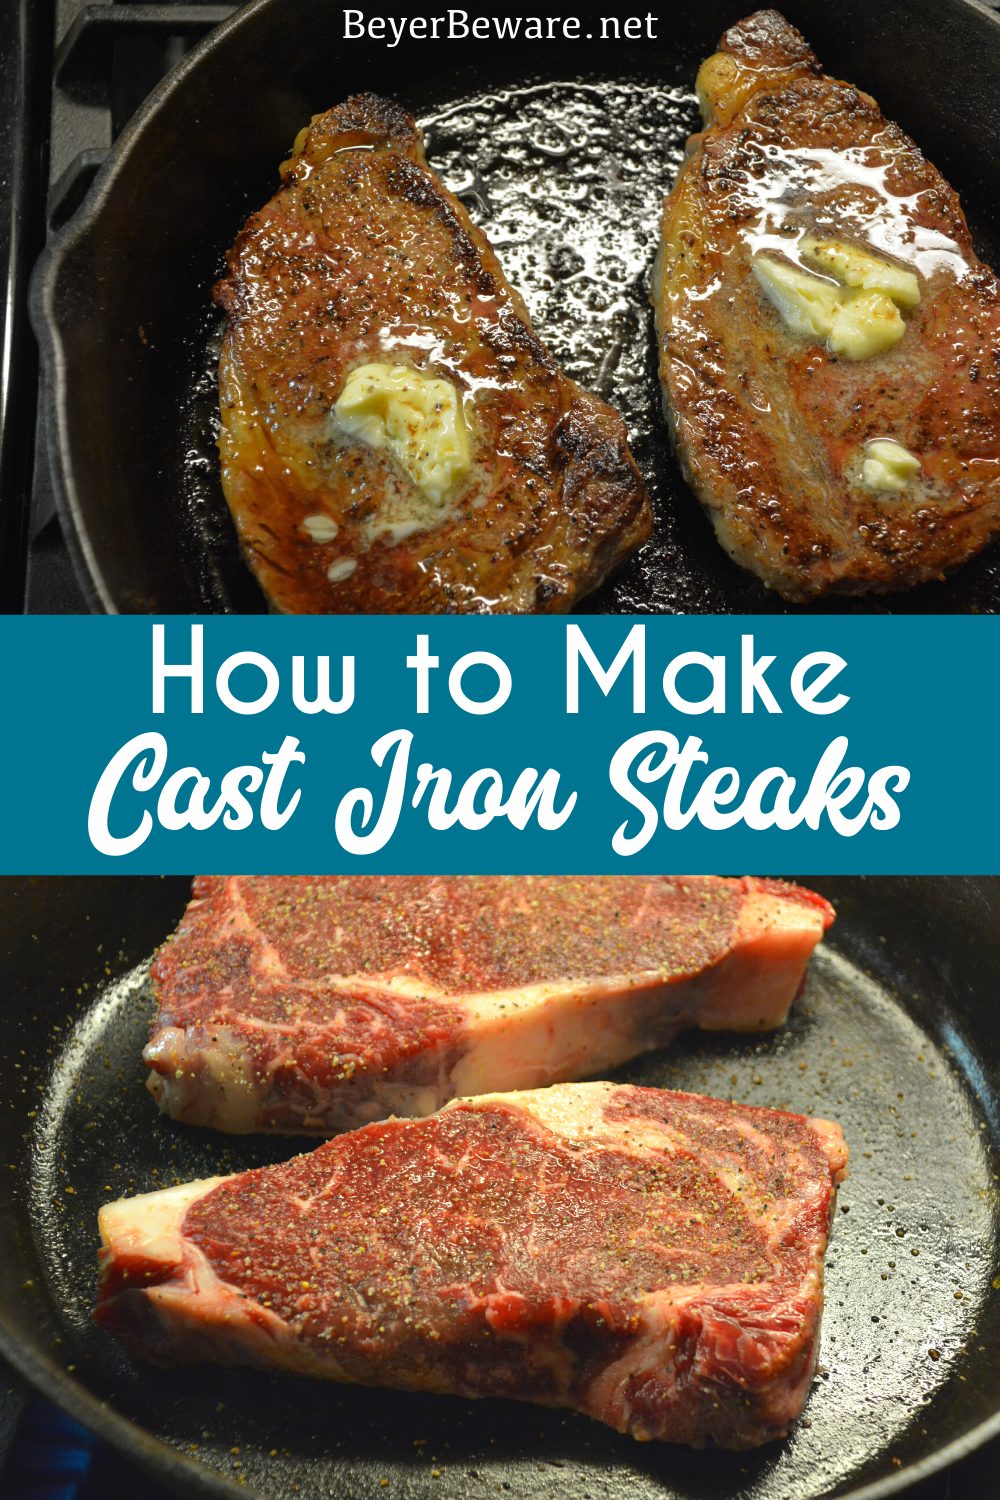 Cast Iron Skillet Steaks - How to make a steak on the stove and in the oven that is cooked medium rare or well done, this is how to make the perfect steak every time. #Steaks #CastIron #Beef #recipes